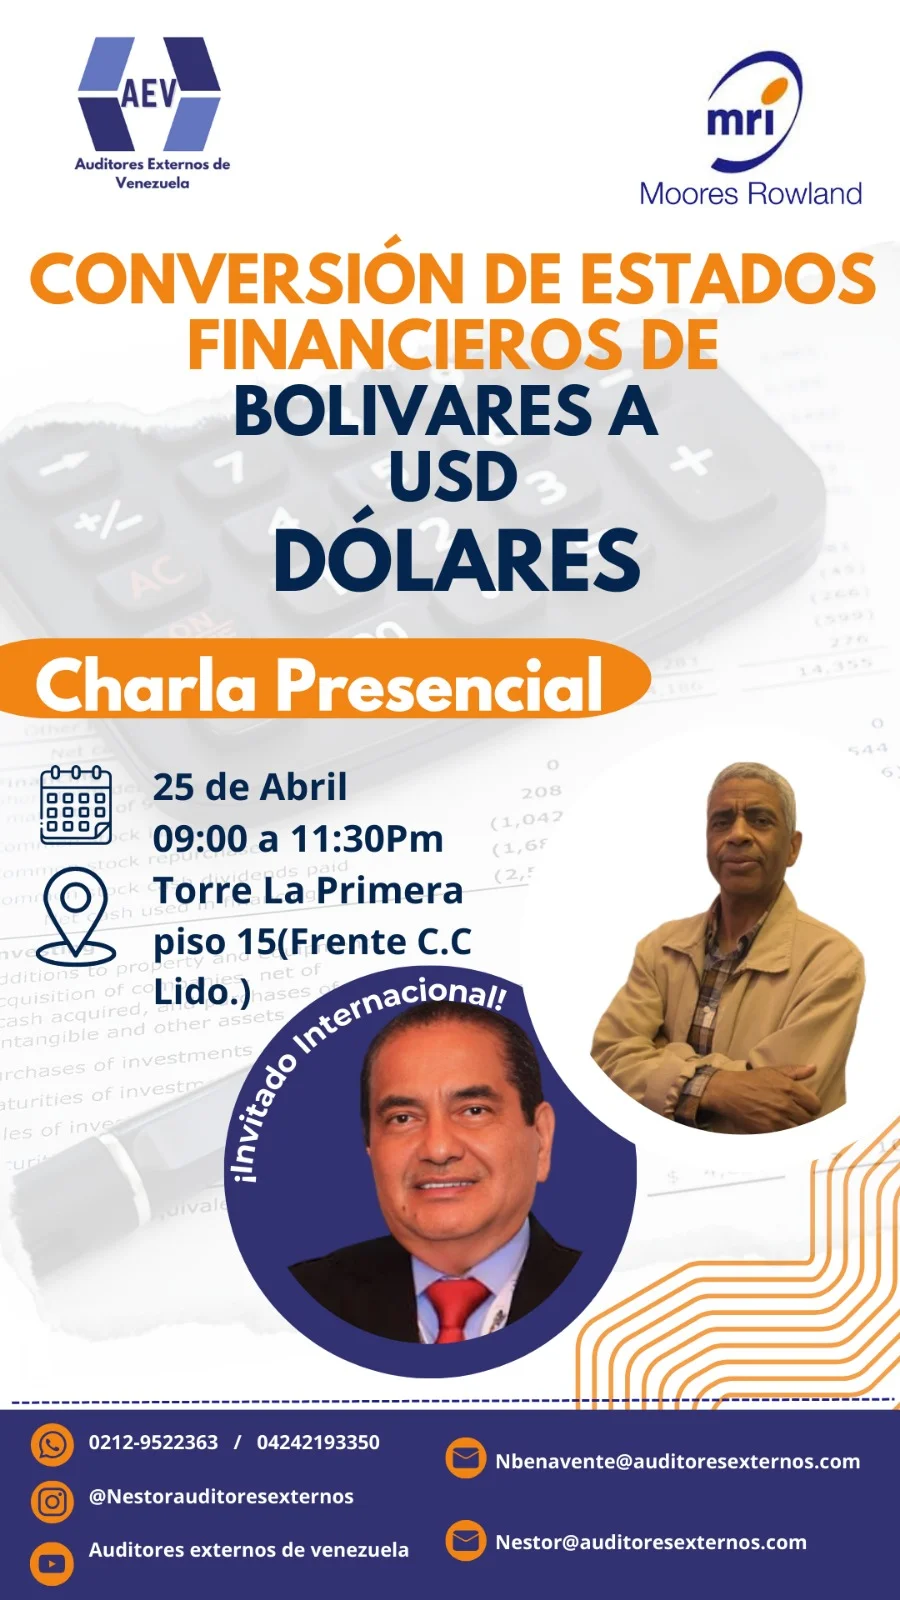 Conversion of Financial Statements from Bolivars to USD Dollars